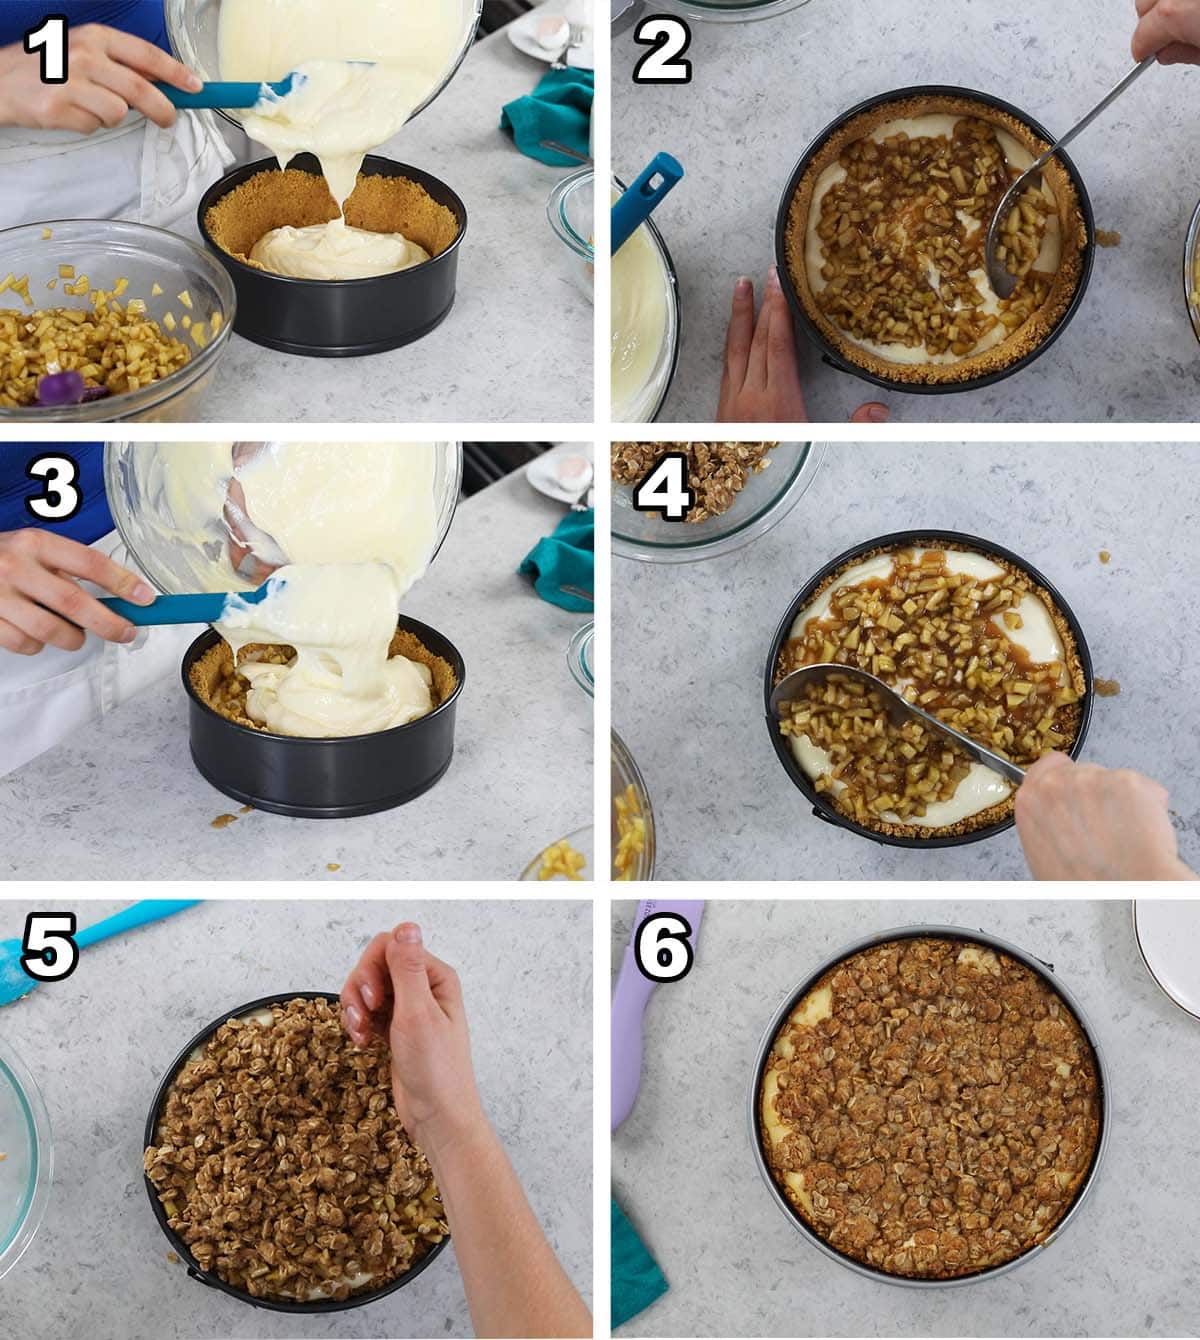 Six photos showing cheesecake batter being poured into a crust, layered with apple pie filling, and topped with a crumb topping.